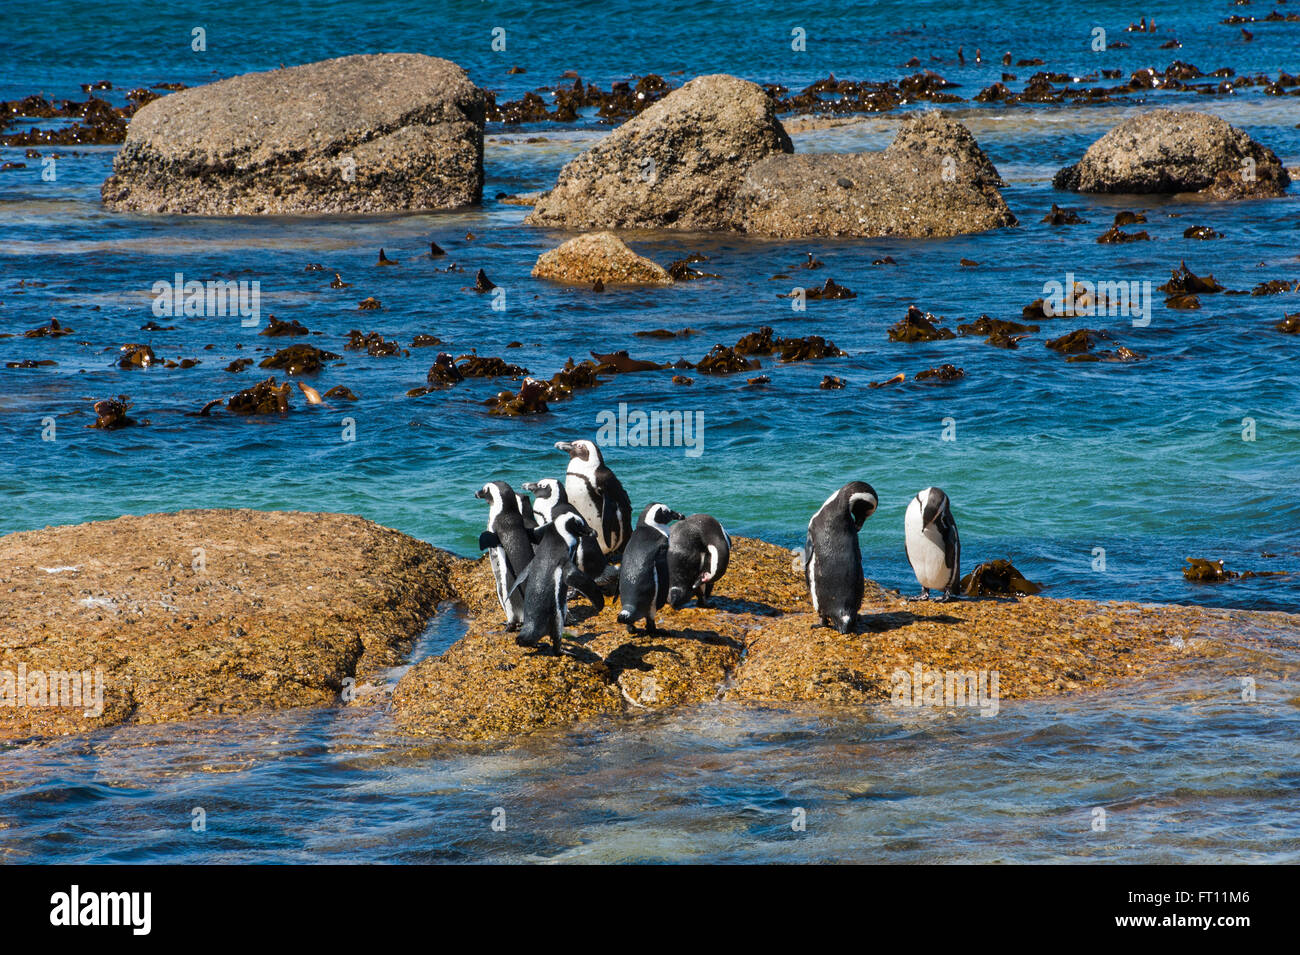 Banded penguins Spheniscus demersus at a rock, Simon's Town, Cape Town, Western Cape, South Africa Stock Photo